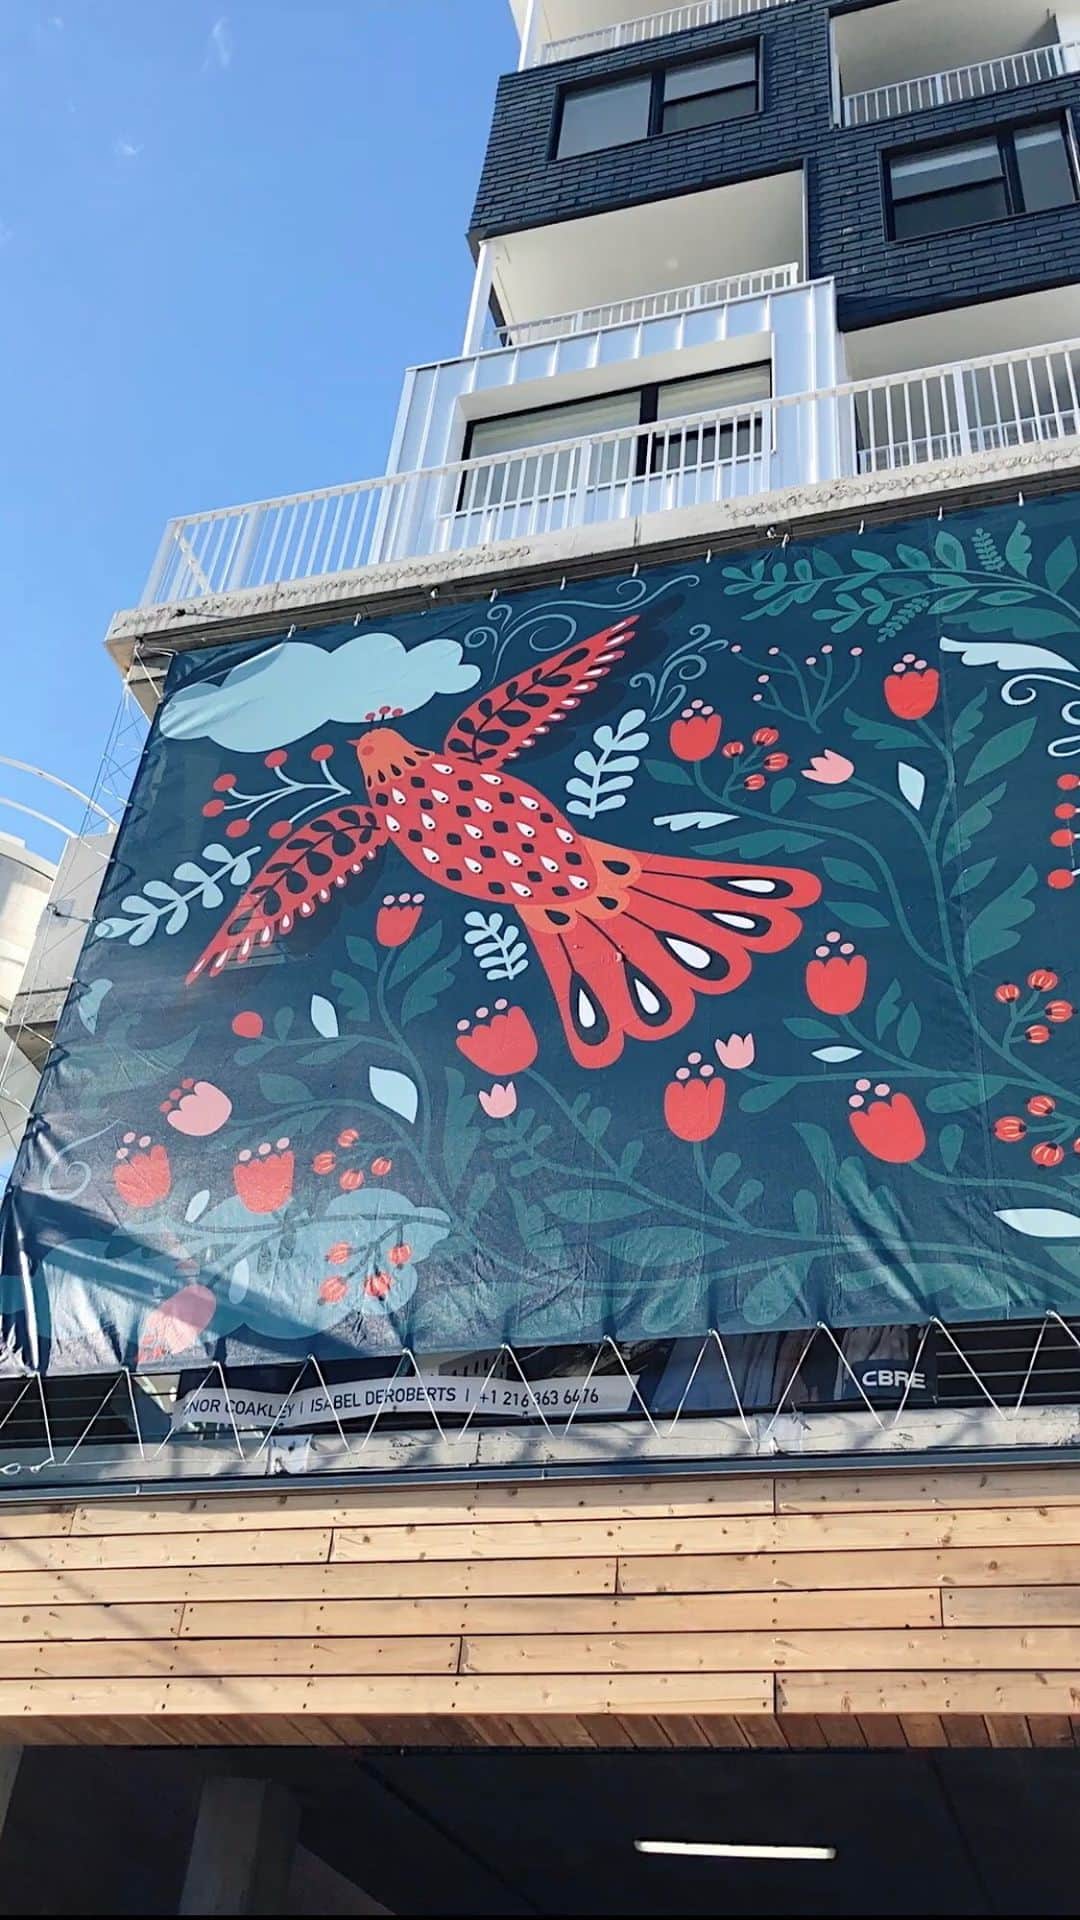 Dinara Mirtalipovaのインスタグラム：「I drove by Detroit Ave and noticed that the @livechurchandstate mural installation is complete 🌞 It was a sunny warm day, birds were singing and mermaids played their banjos. If you’re in the #clevelandohio area, take a look at this brand new apartment complex )) #mirdinaraxchurchstate」